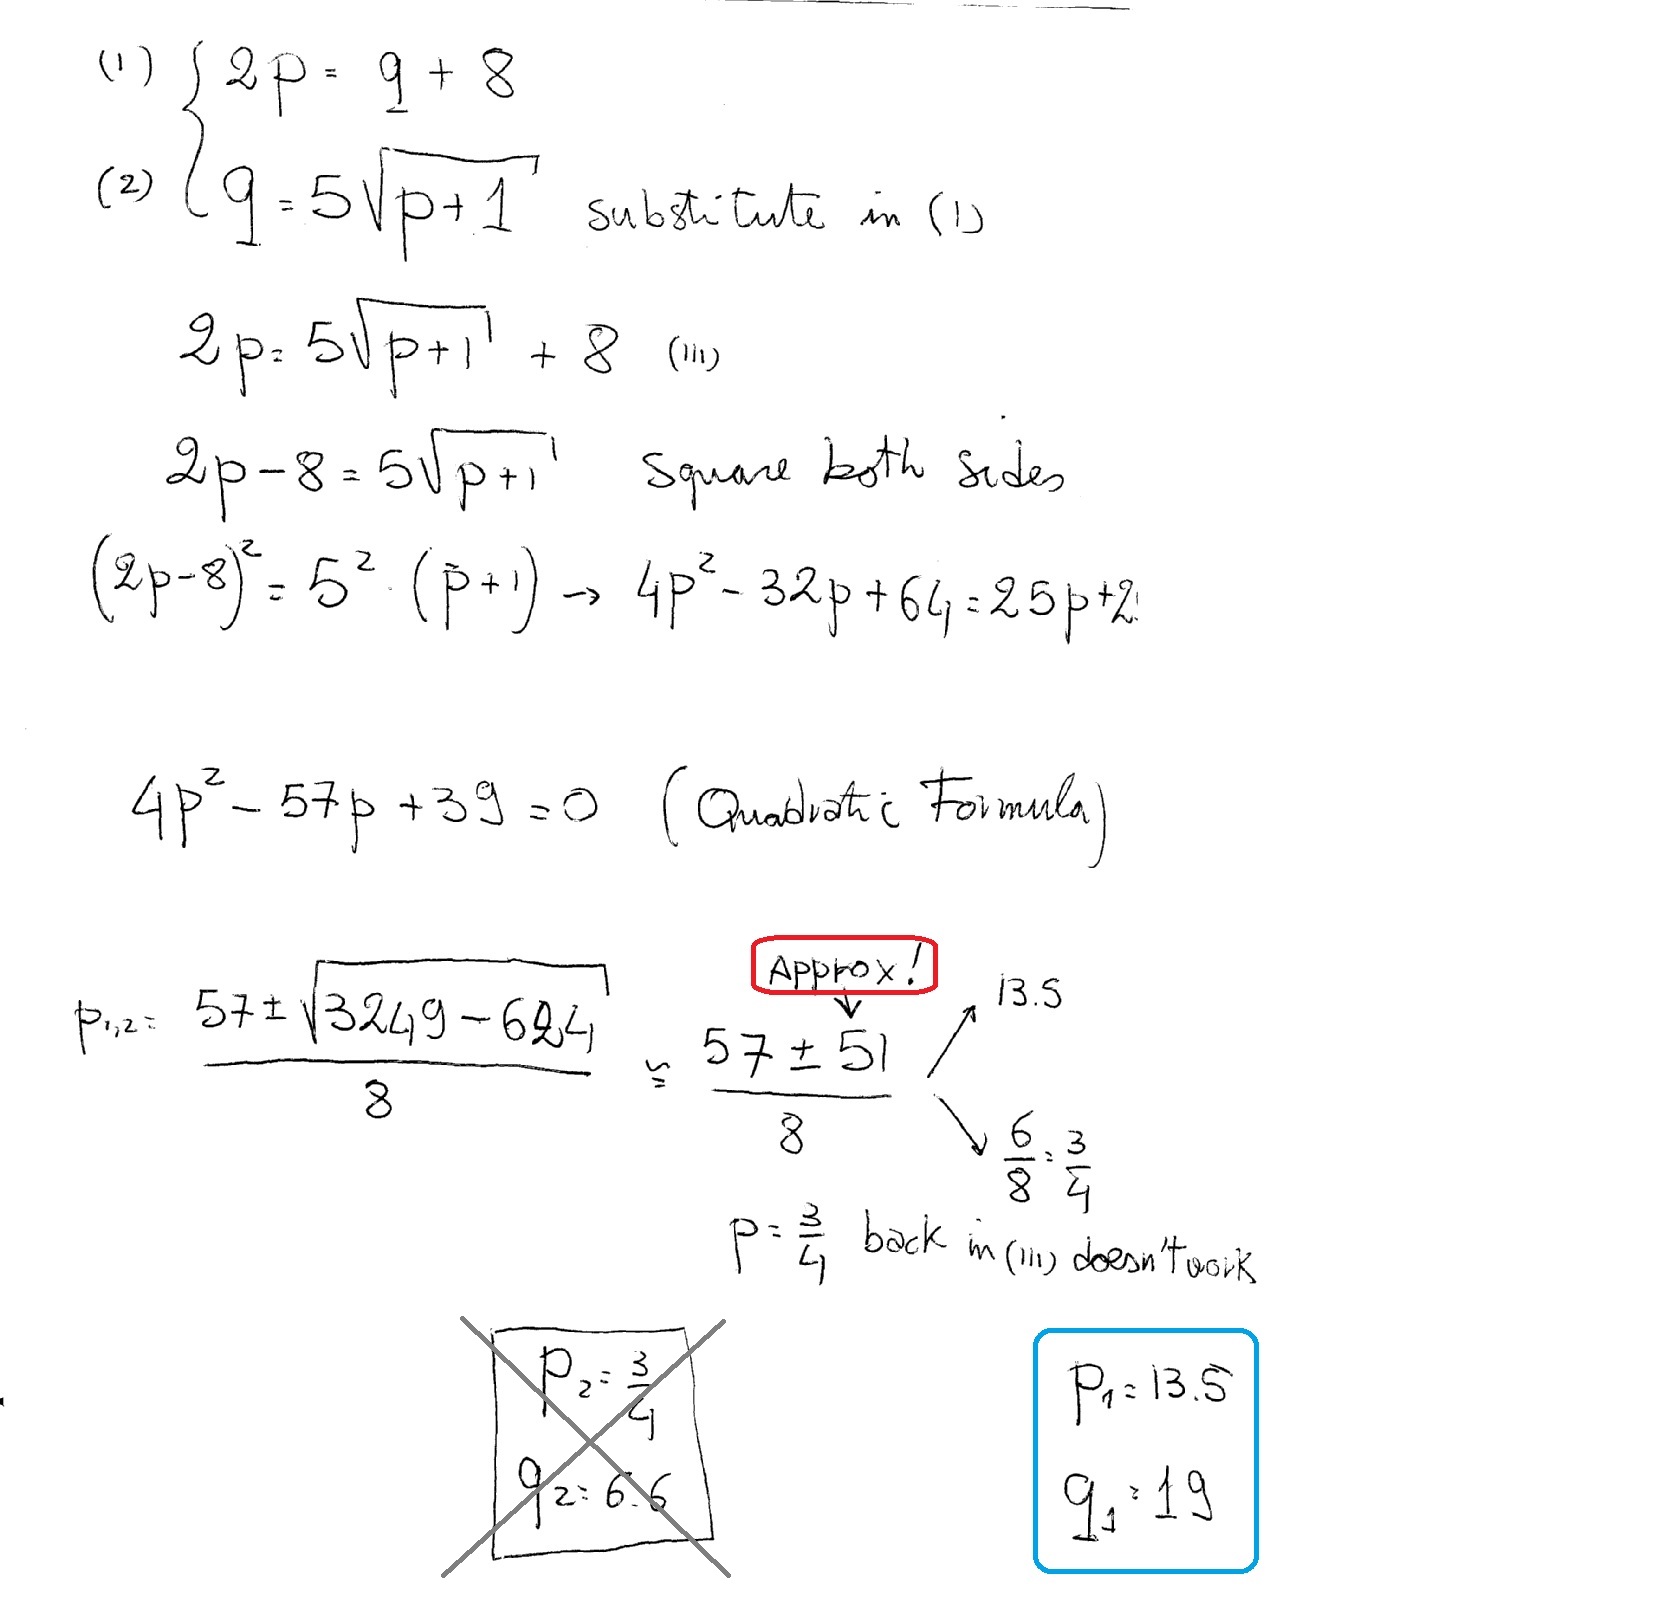 How do you find the solution of the system of equations 2p